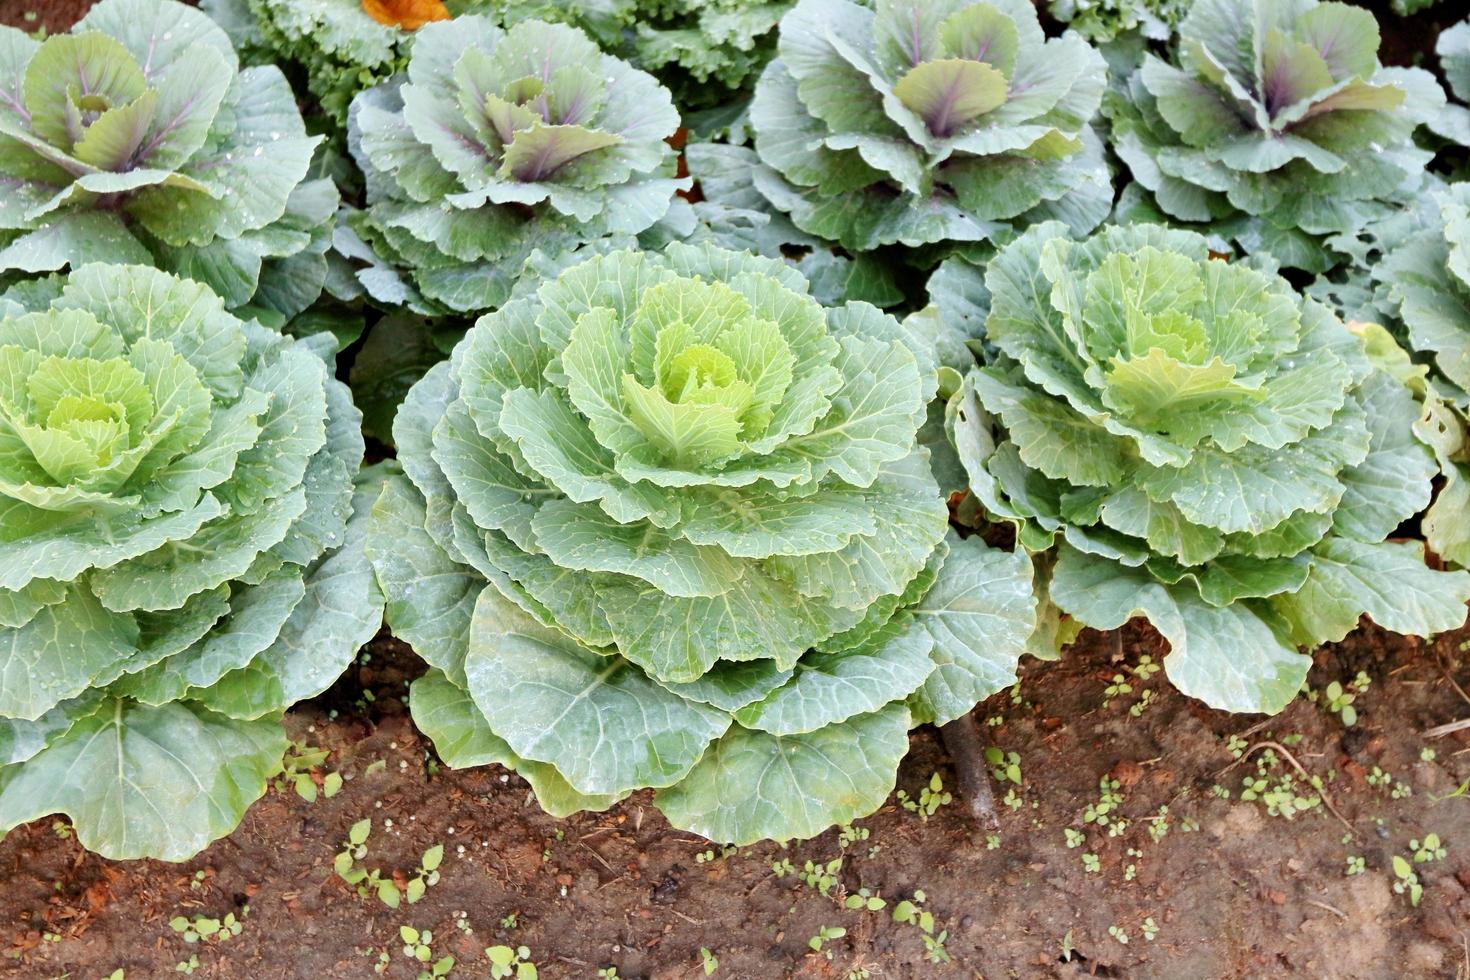 Cabbage blooming in the garden, selective focus photo